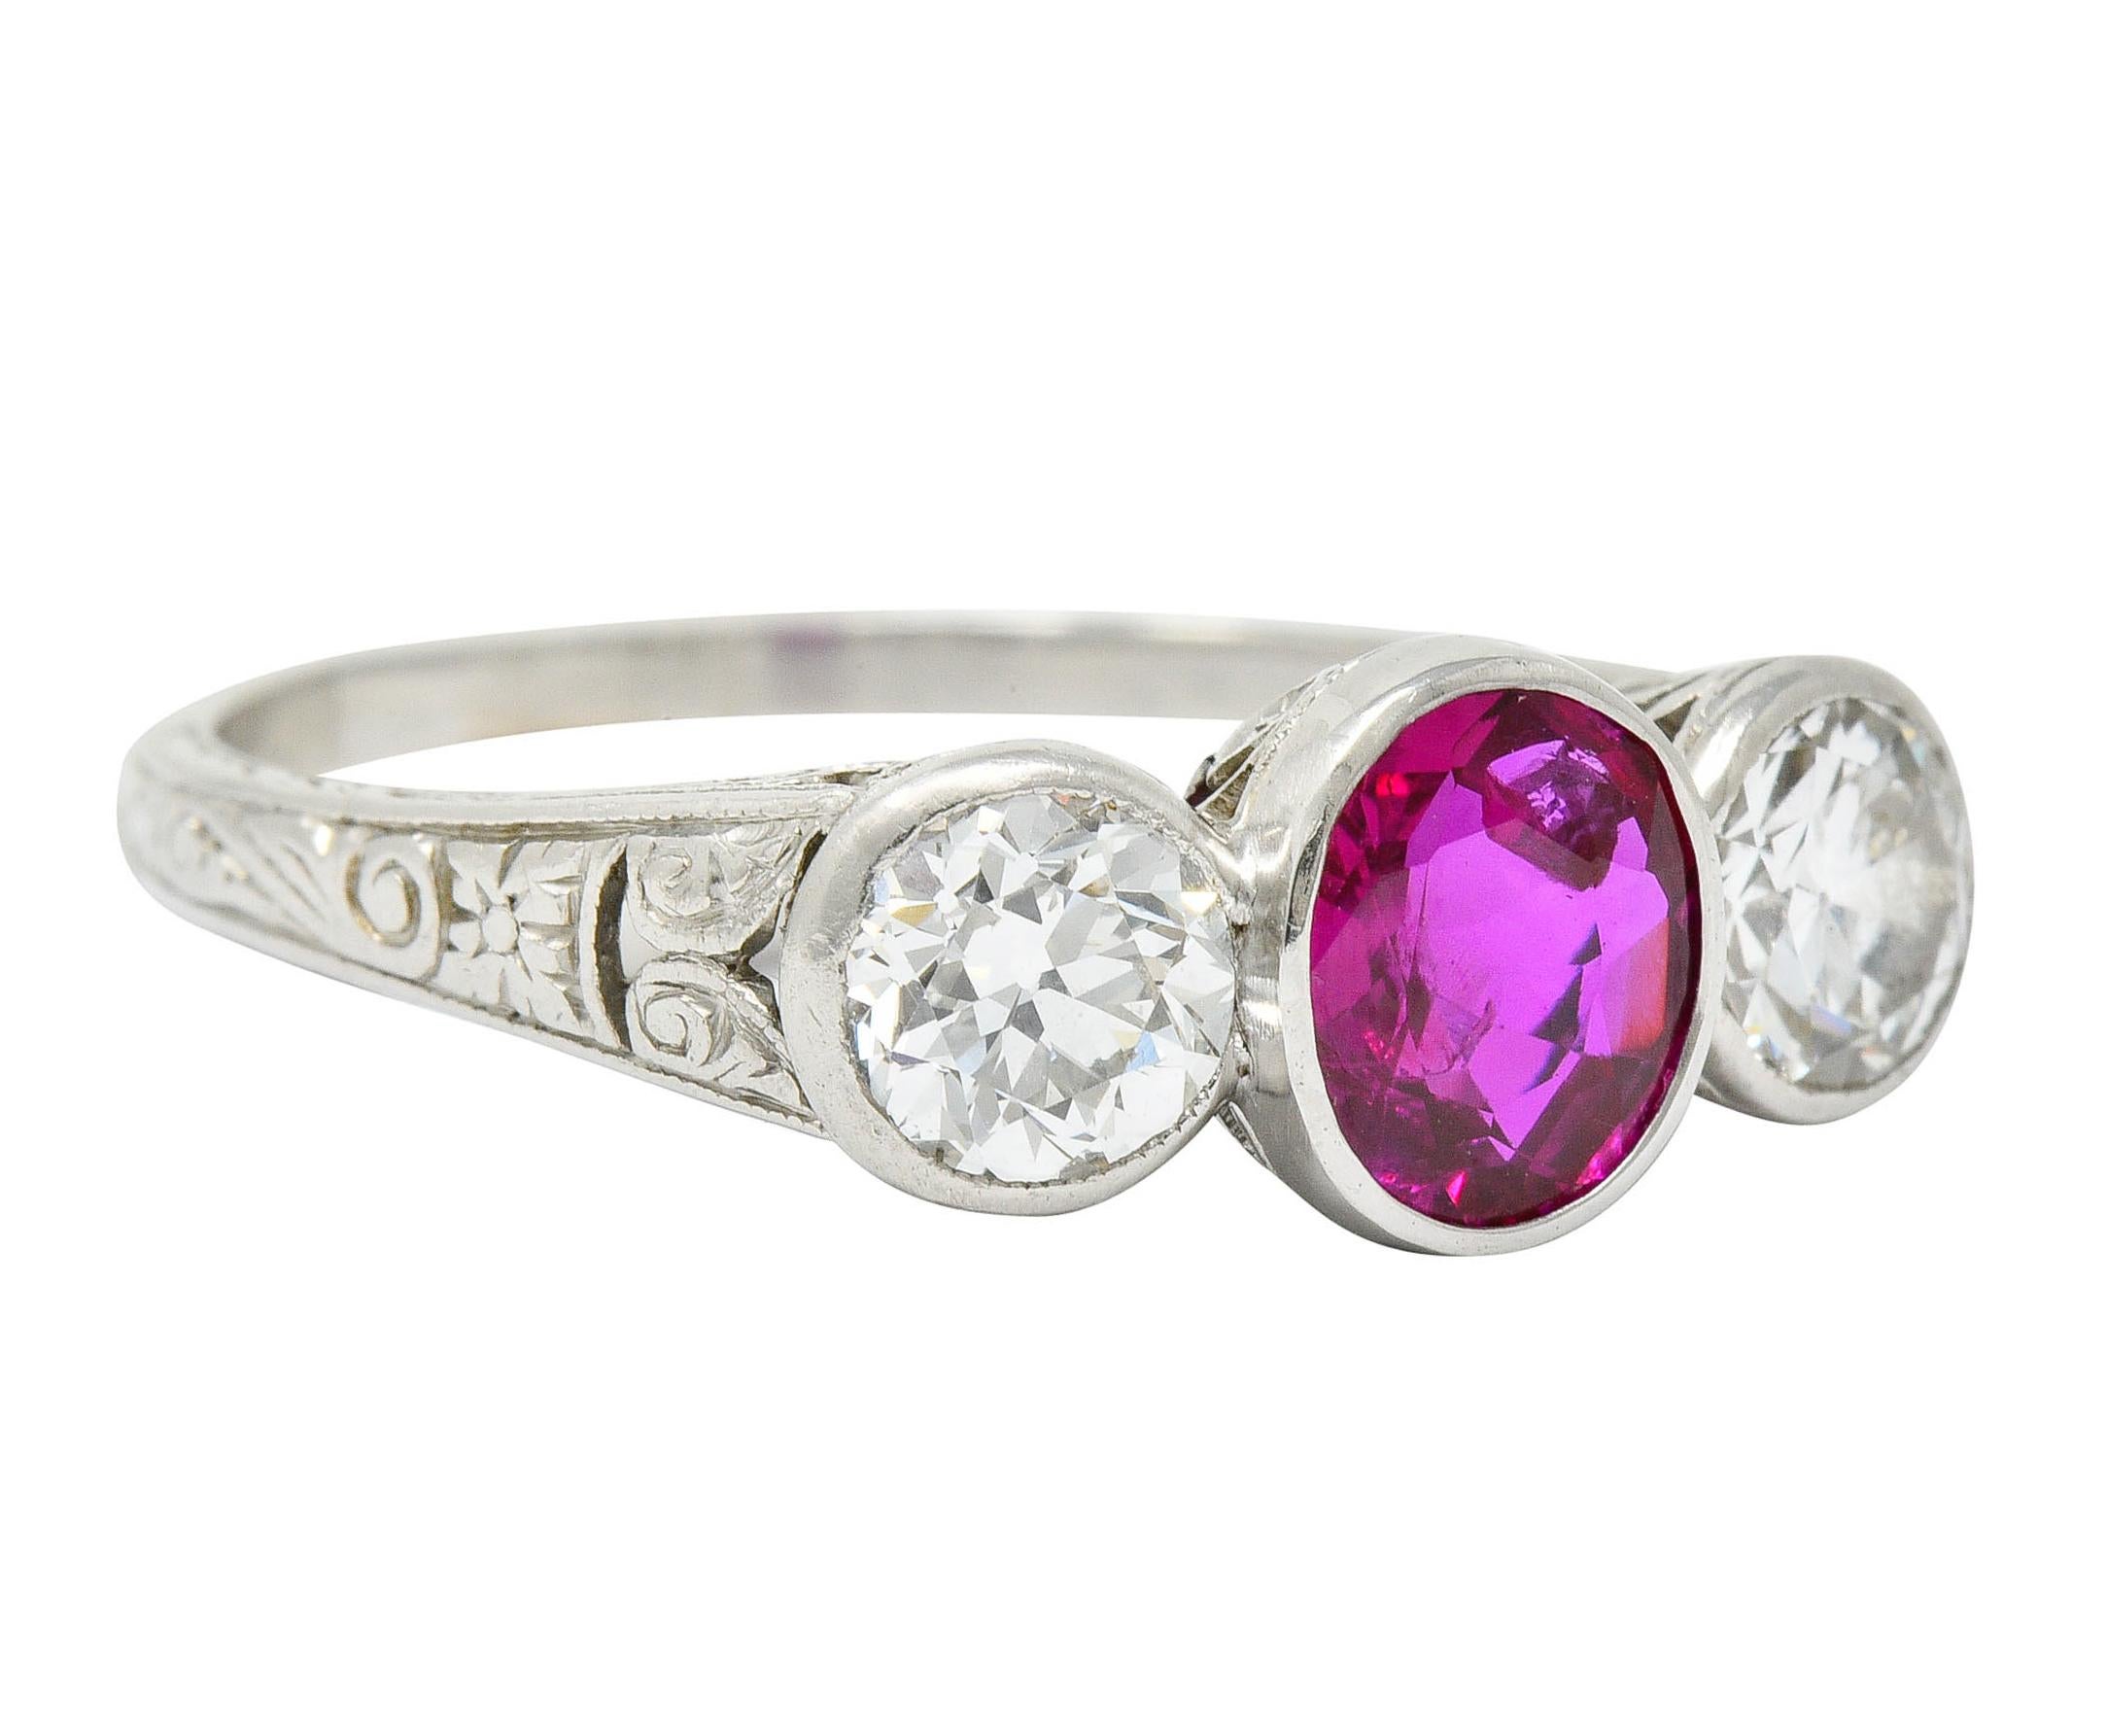 Three stone ring centers a bezel set oval cut Burmese ruby weighing approximately 1.03 carat

Transparent with pinkish-red color and no indications of heat

Flanked by old European cut diamonds weighing in total approximately 1.00 carat; G-H color